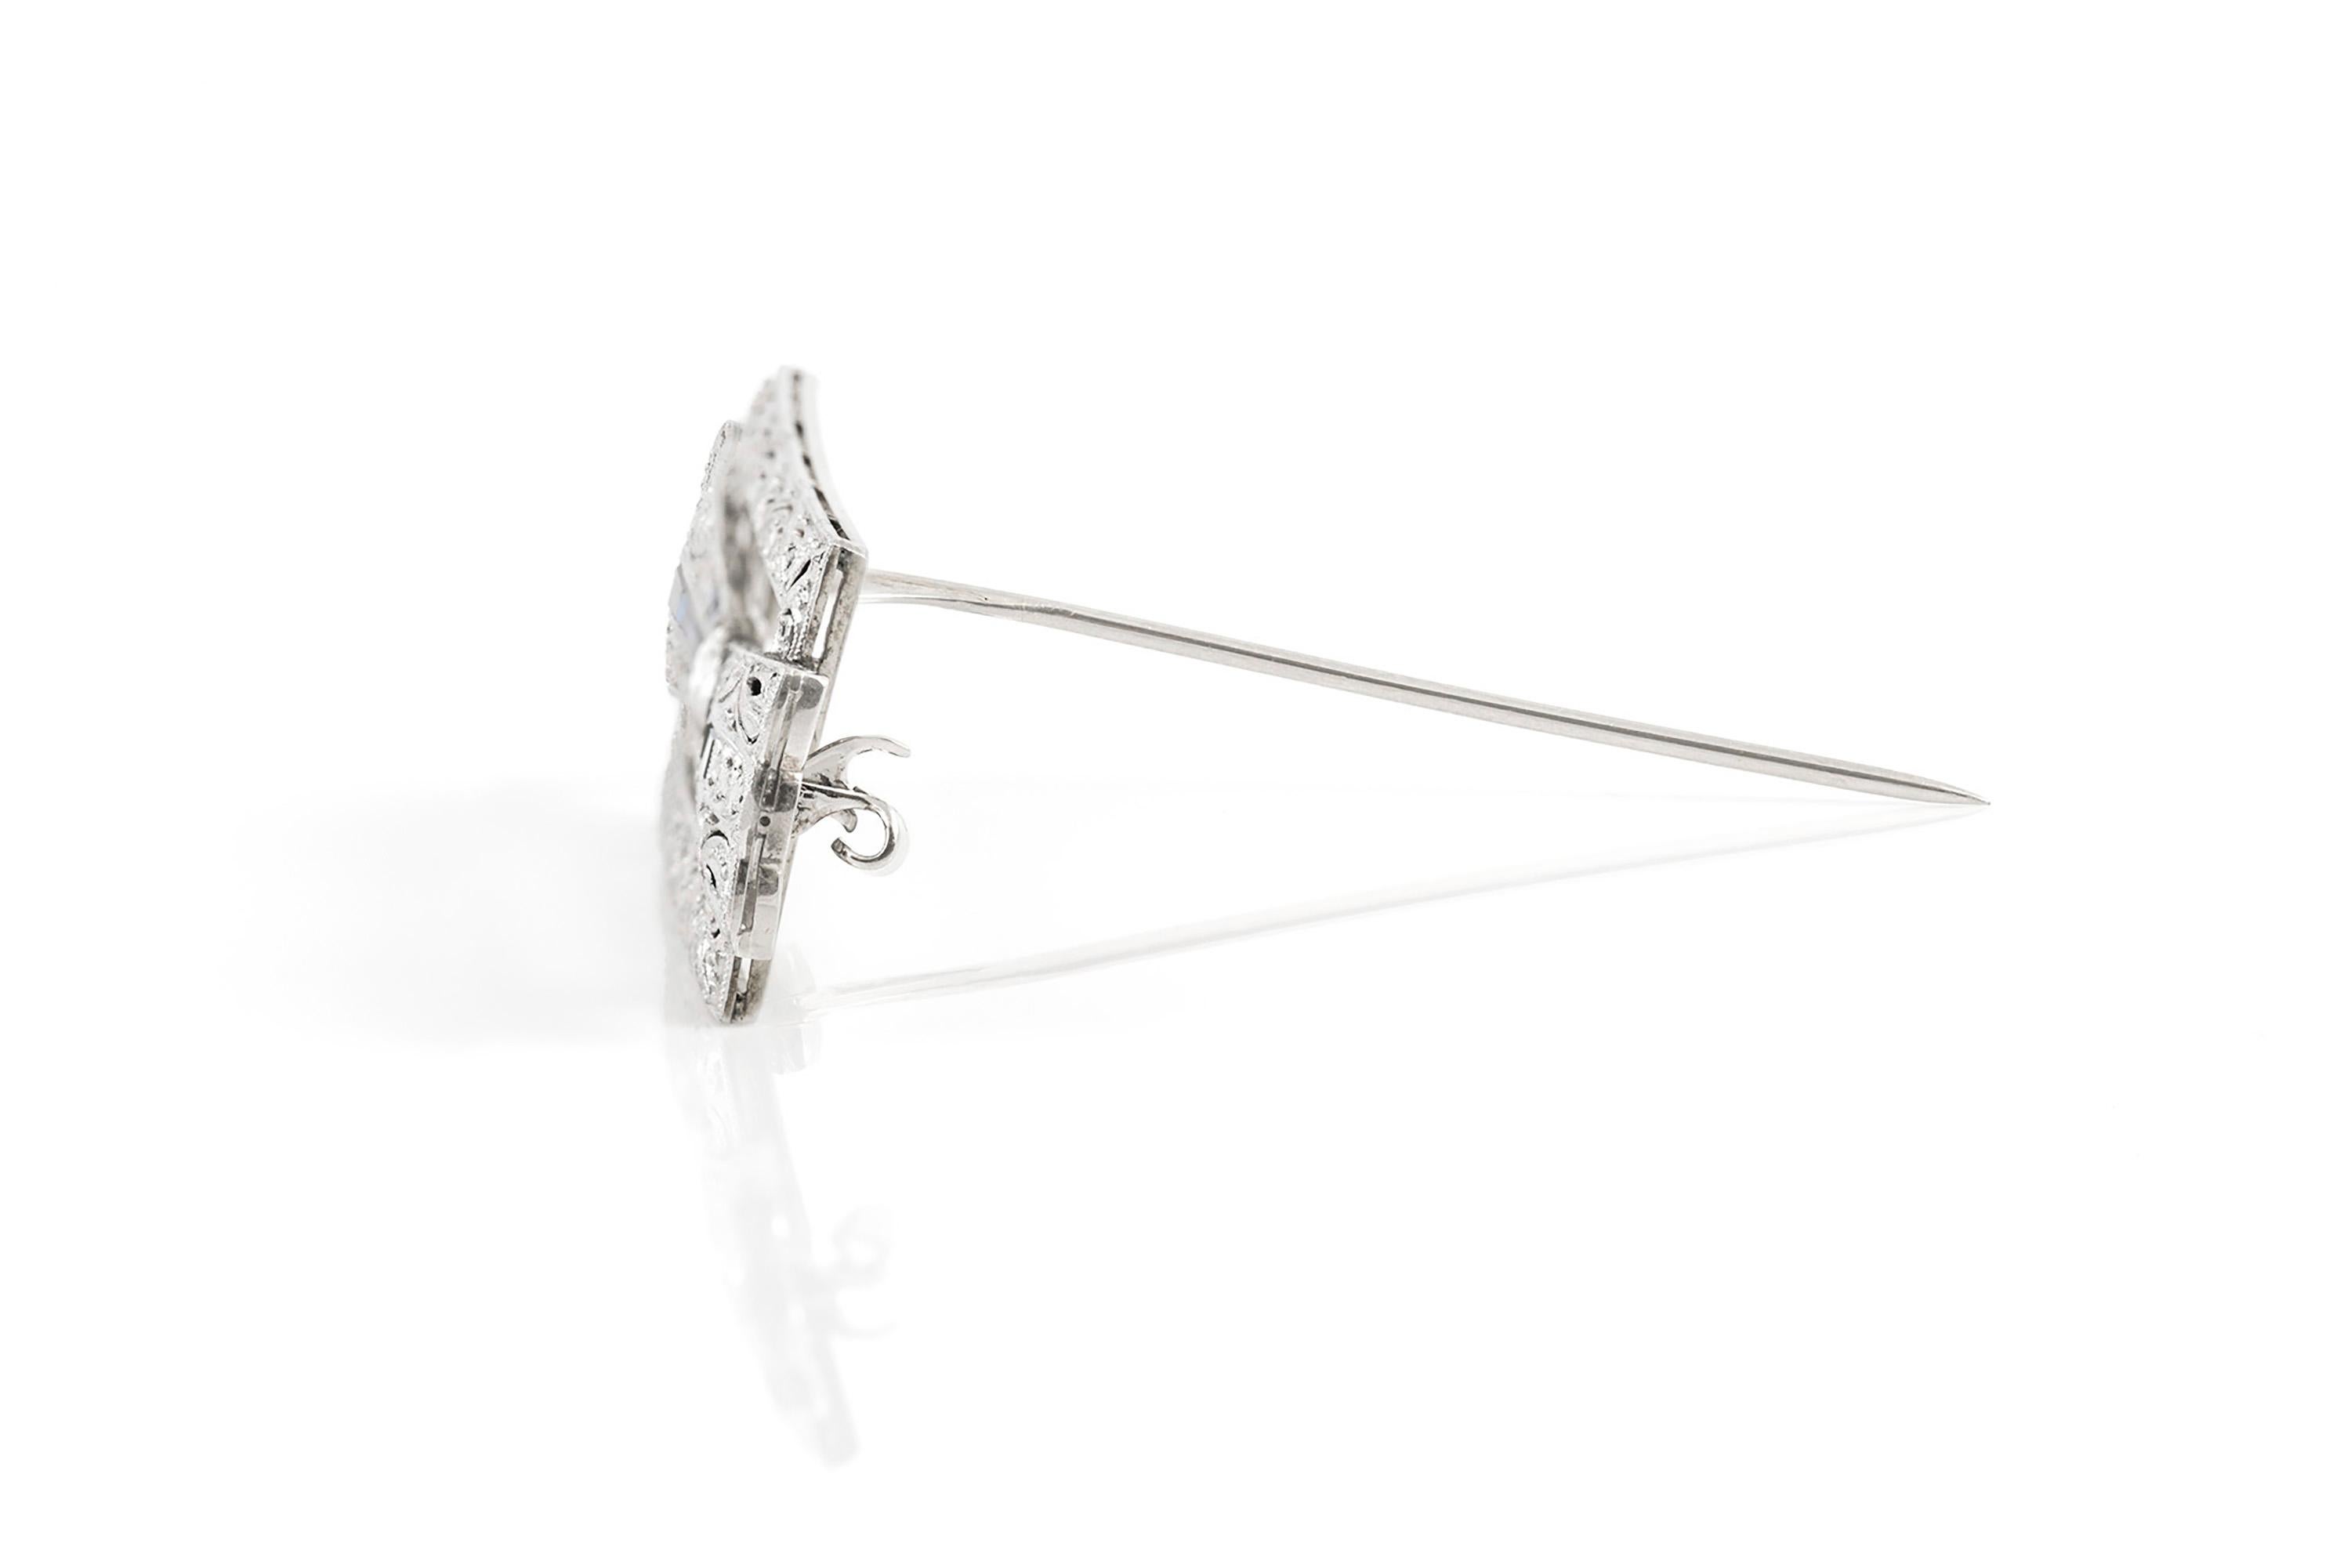 The brooch is finely crafted in platinum with diamonds weighing approximately 1.50 carat and syntetic sapphire.